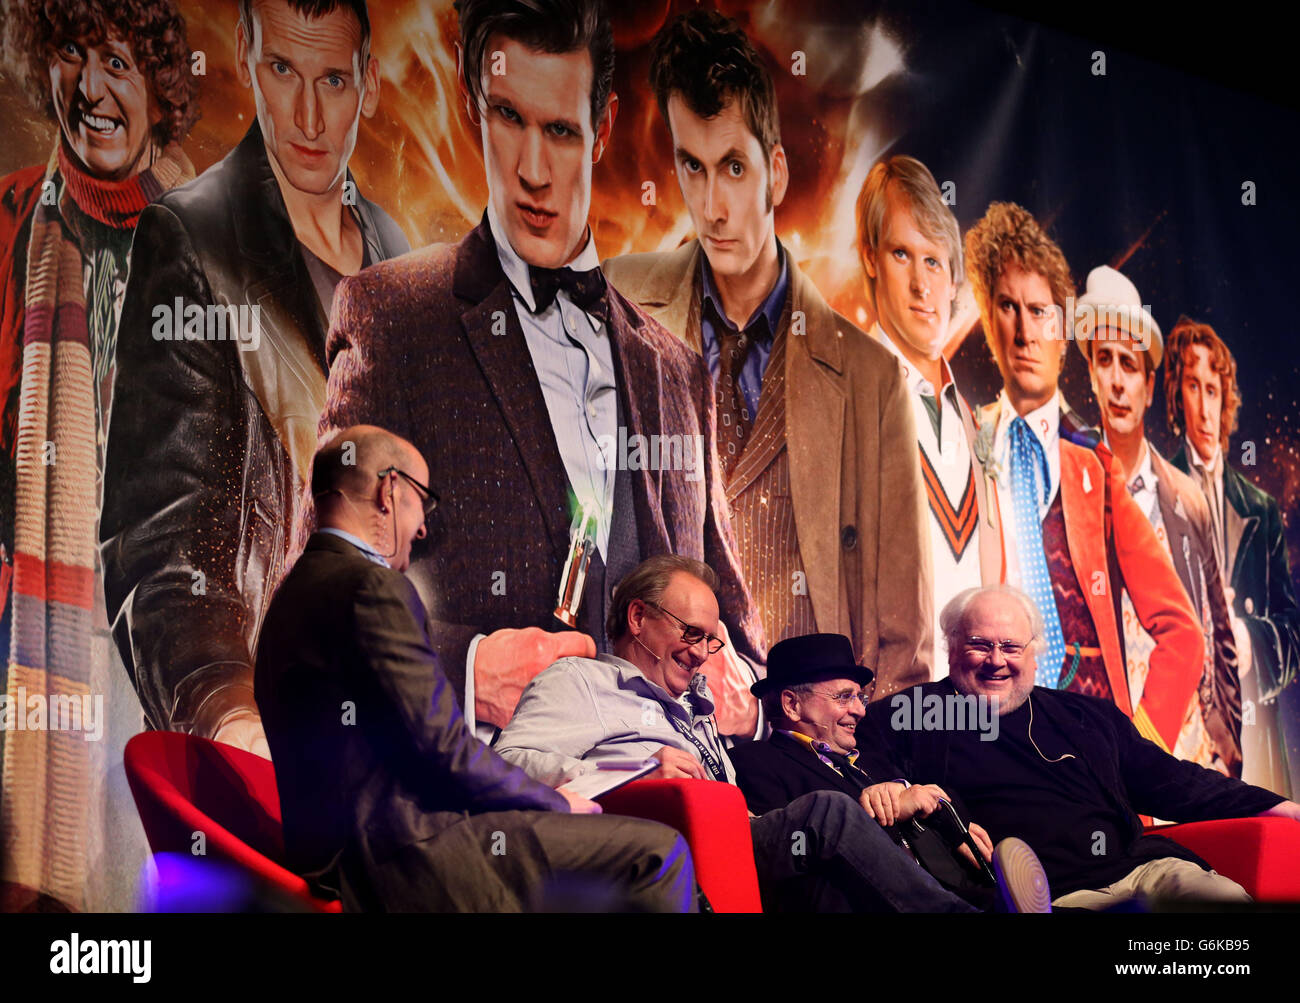 Former Doctor Who actors (left to right) Peter Davison, Sylvester McCoy and Colin Baker during a Q&A at the Doctor Who Official 50th Celebration at the London Excel Centre Docklands. Stock Photo